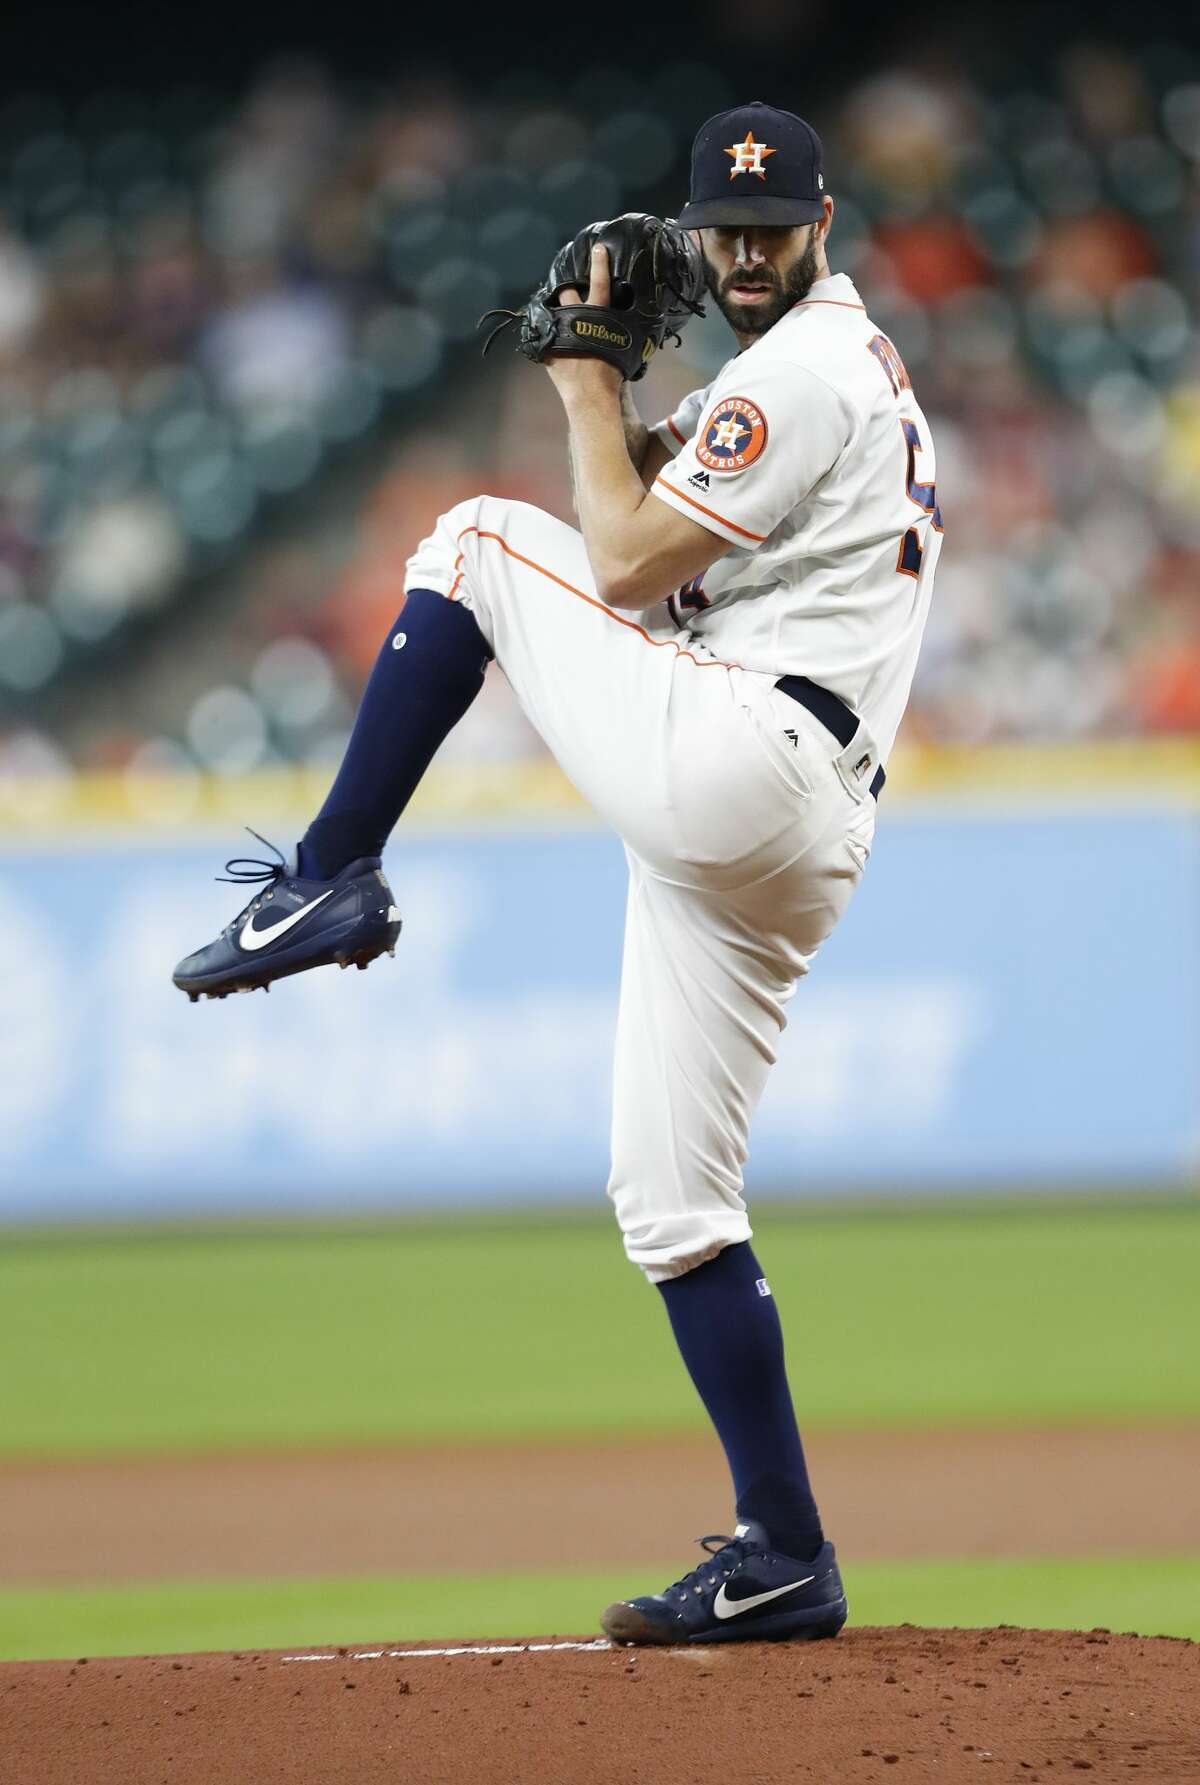 Houston Astros starting pitcher Mike Fiers (54) pitches in the first inning of an MLB baseball game at Minute Maid Park, Wednesday, Aug. 23, 2017, in Houston. ( Karen Warren / Houston Chronicle )